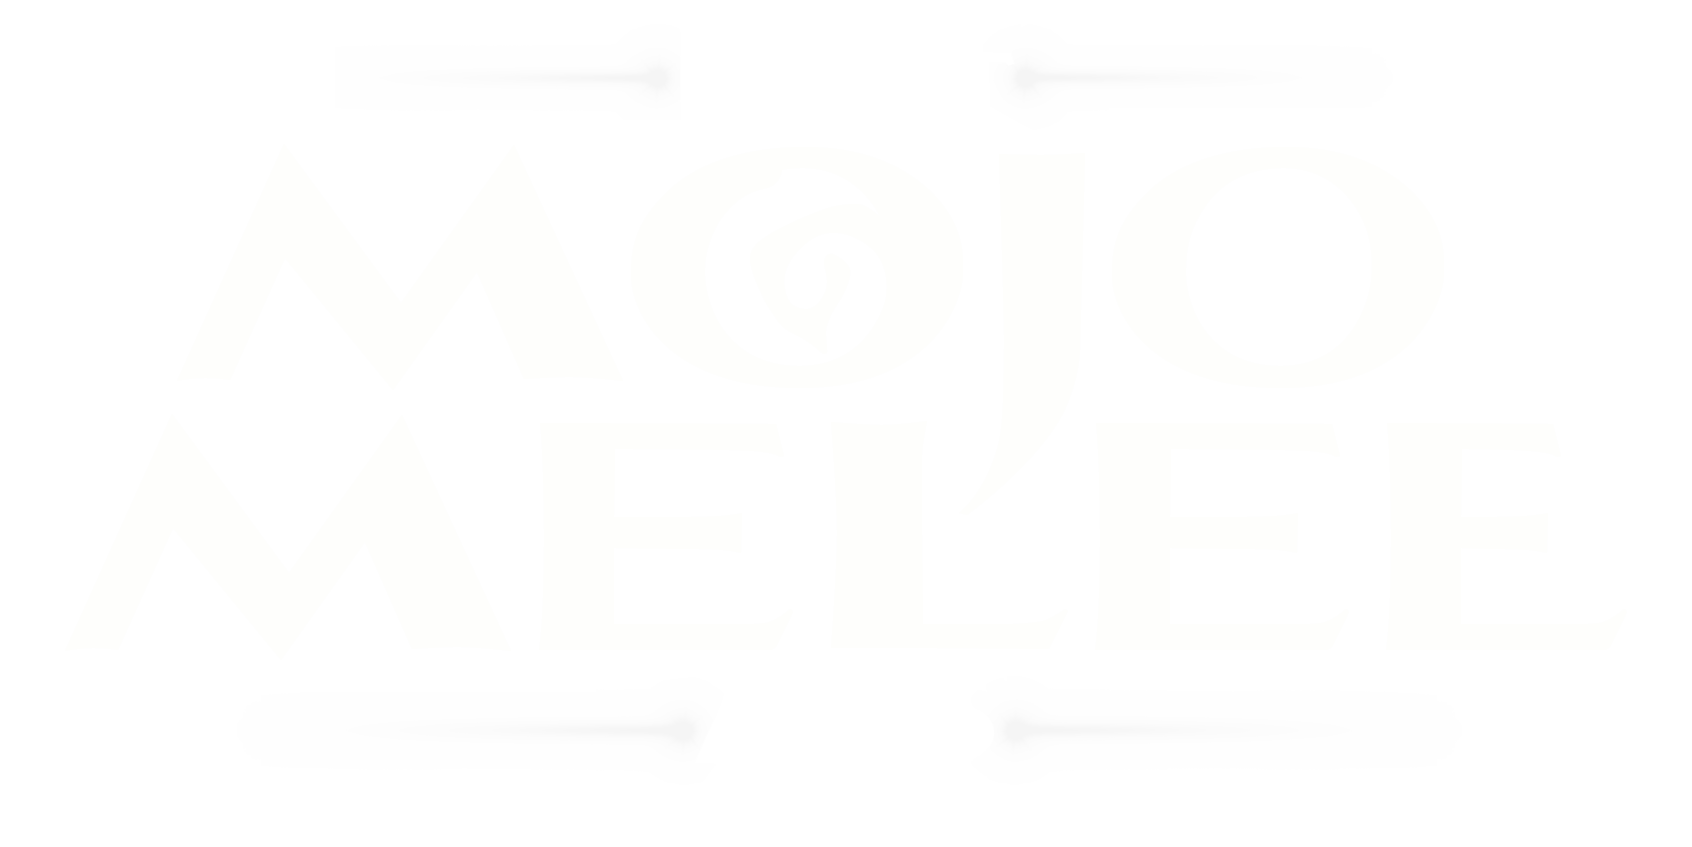 Planet Mojo's Gameplay Leaks and Upcoming Playtest - Play to Earn